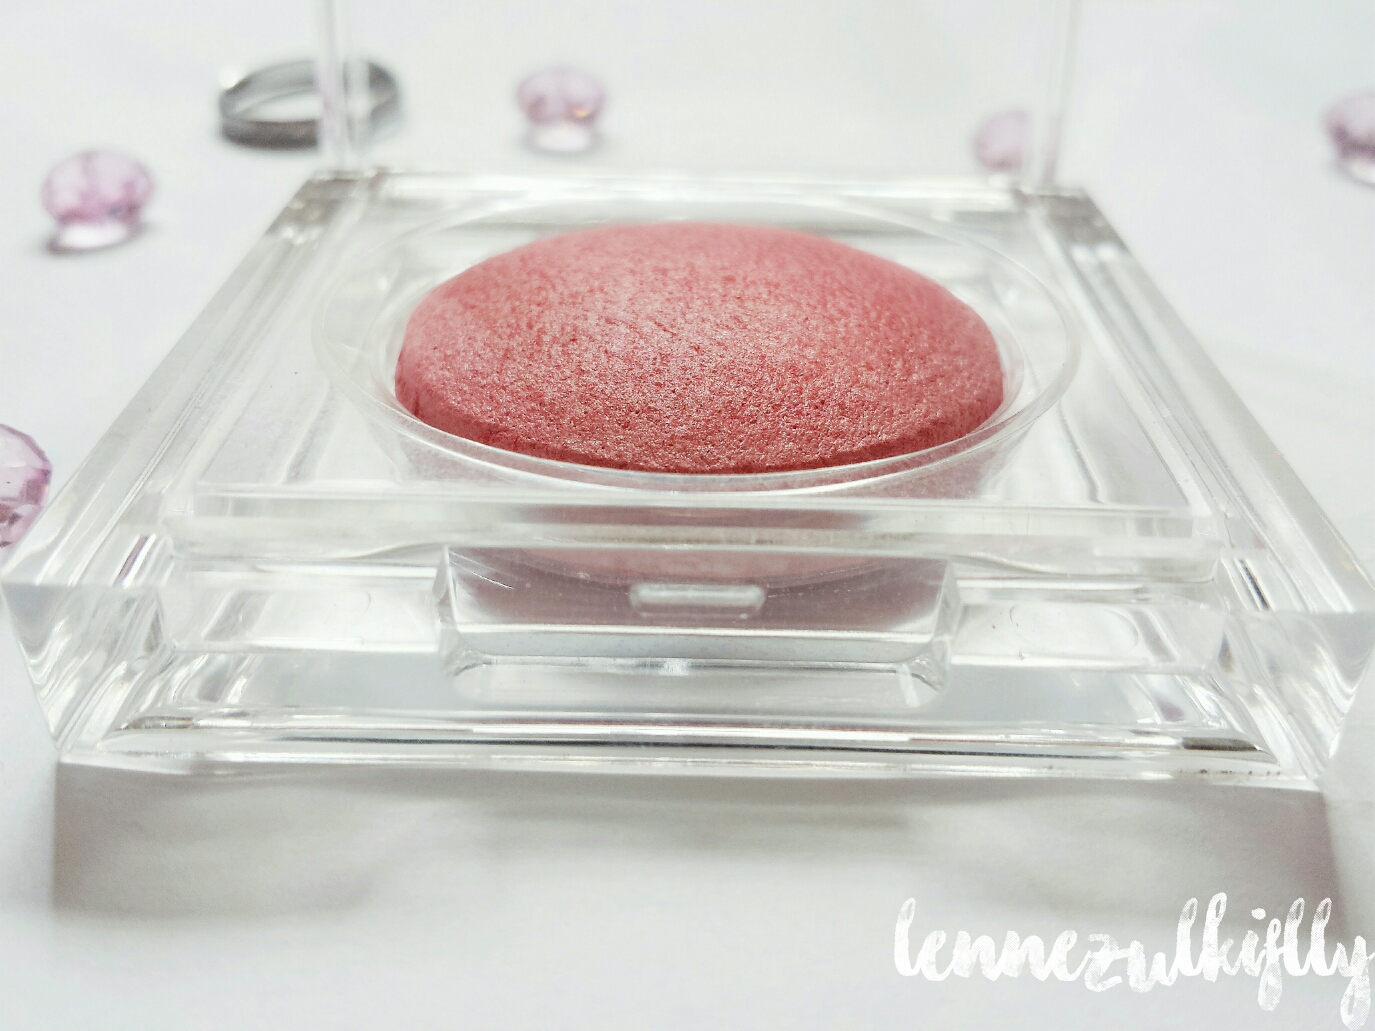 IN2IT Sheer Shimmer Blush in Pink Pearl